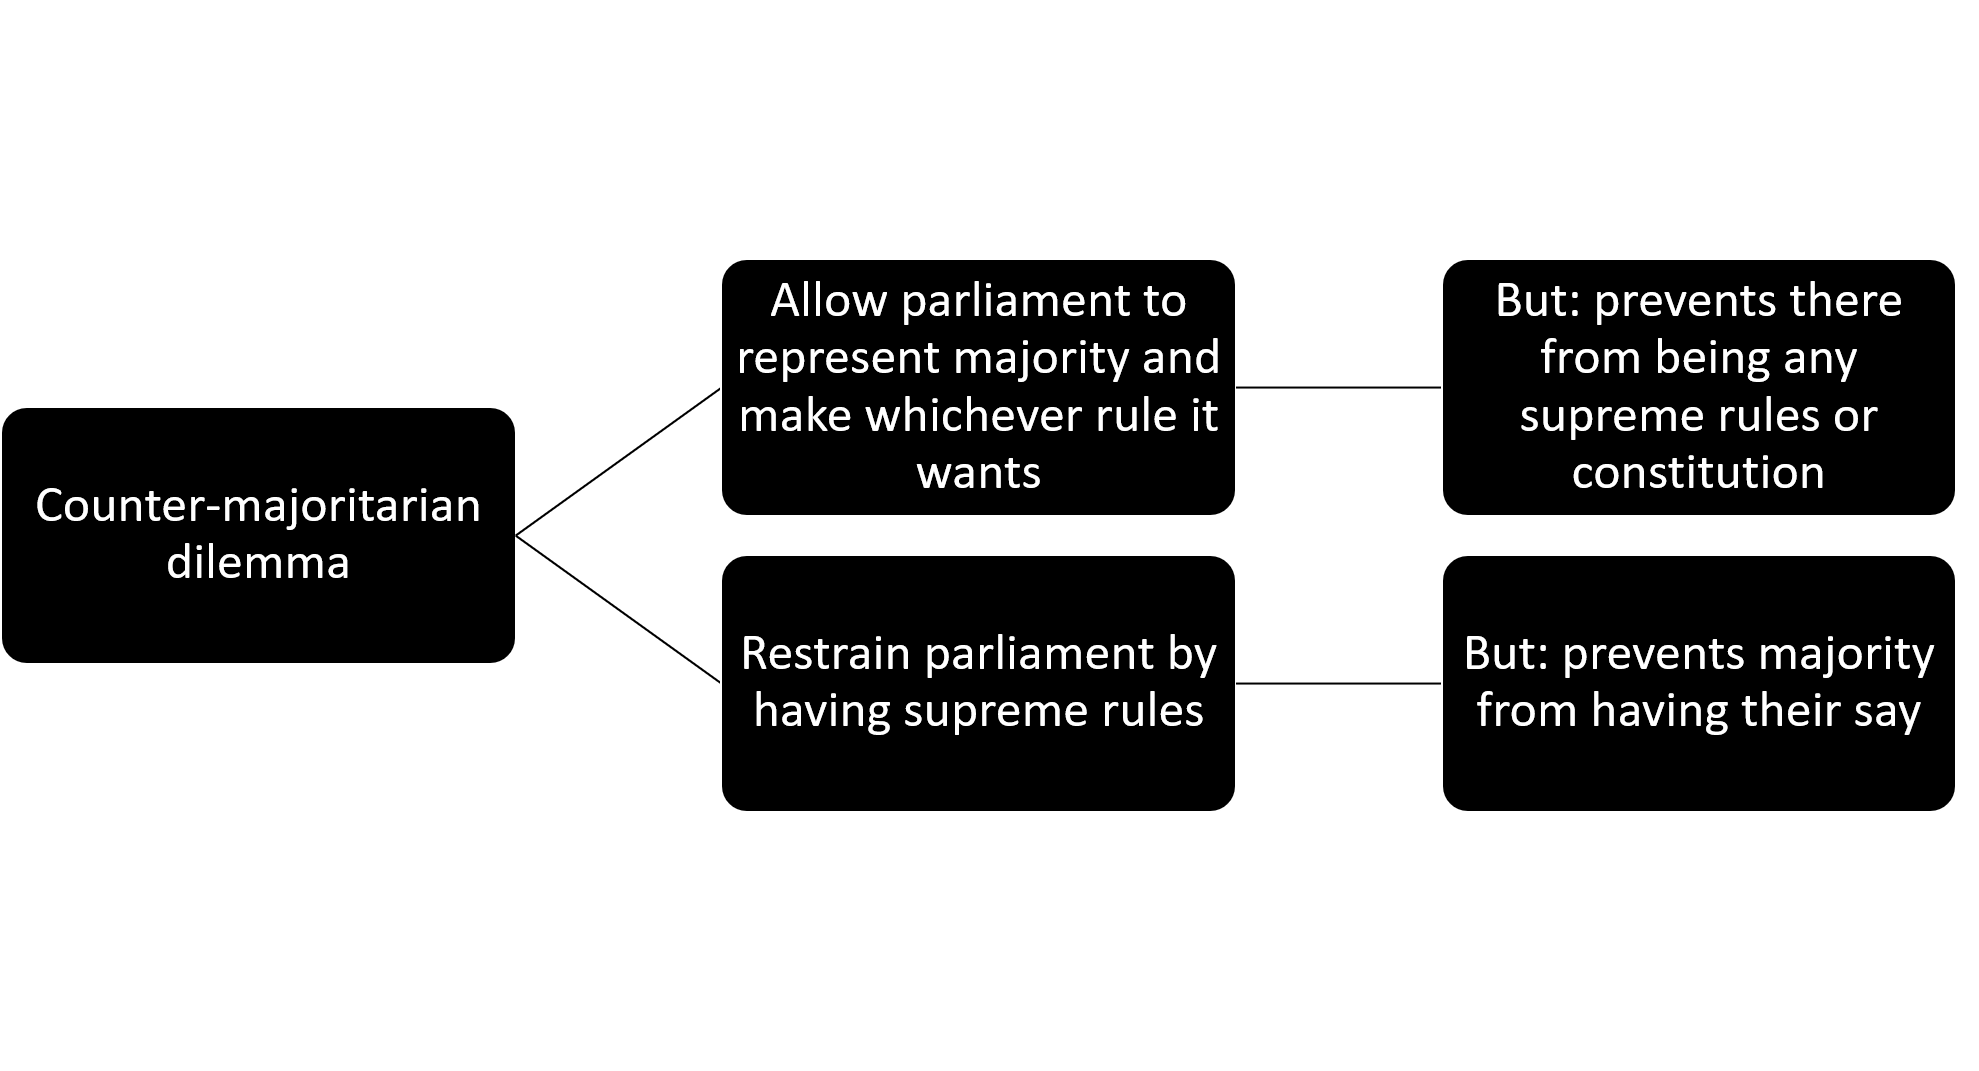 The following hierarchical diagram outlines two aspects of the counter-majoritarian dilemma and their respective implications.The first aspect provided being that the premise of democracy that the majority of the people must determine the rules of the state allows parliament to represent the majority and make whichever rule it wants but, prevents there from being any supreme rules or constitution.The second aspect provided being that constitutional supremacy restrains parliament by having supreme rules but, prevents the majority from having their say.